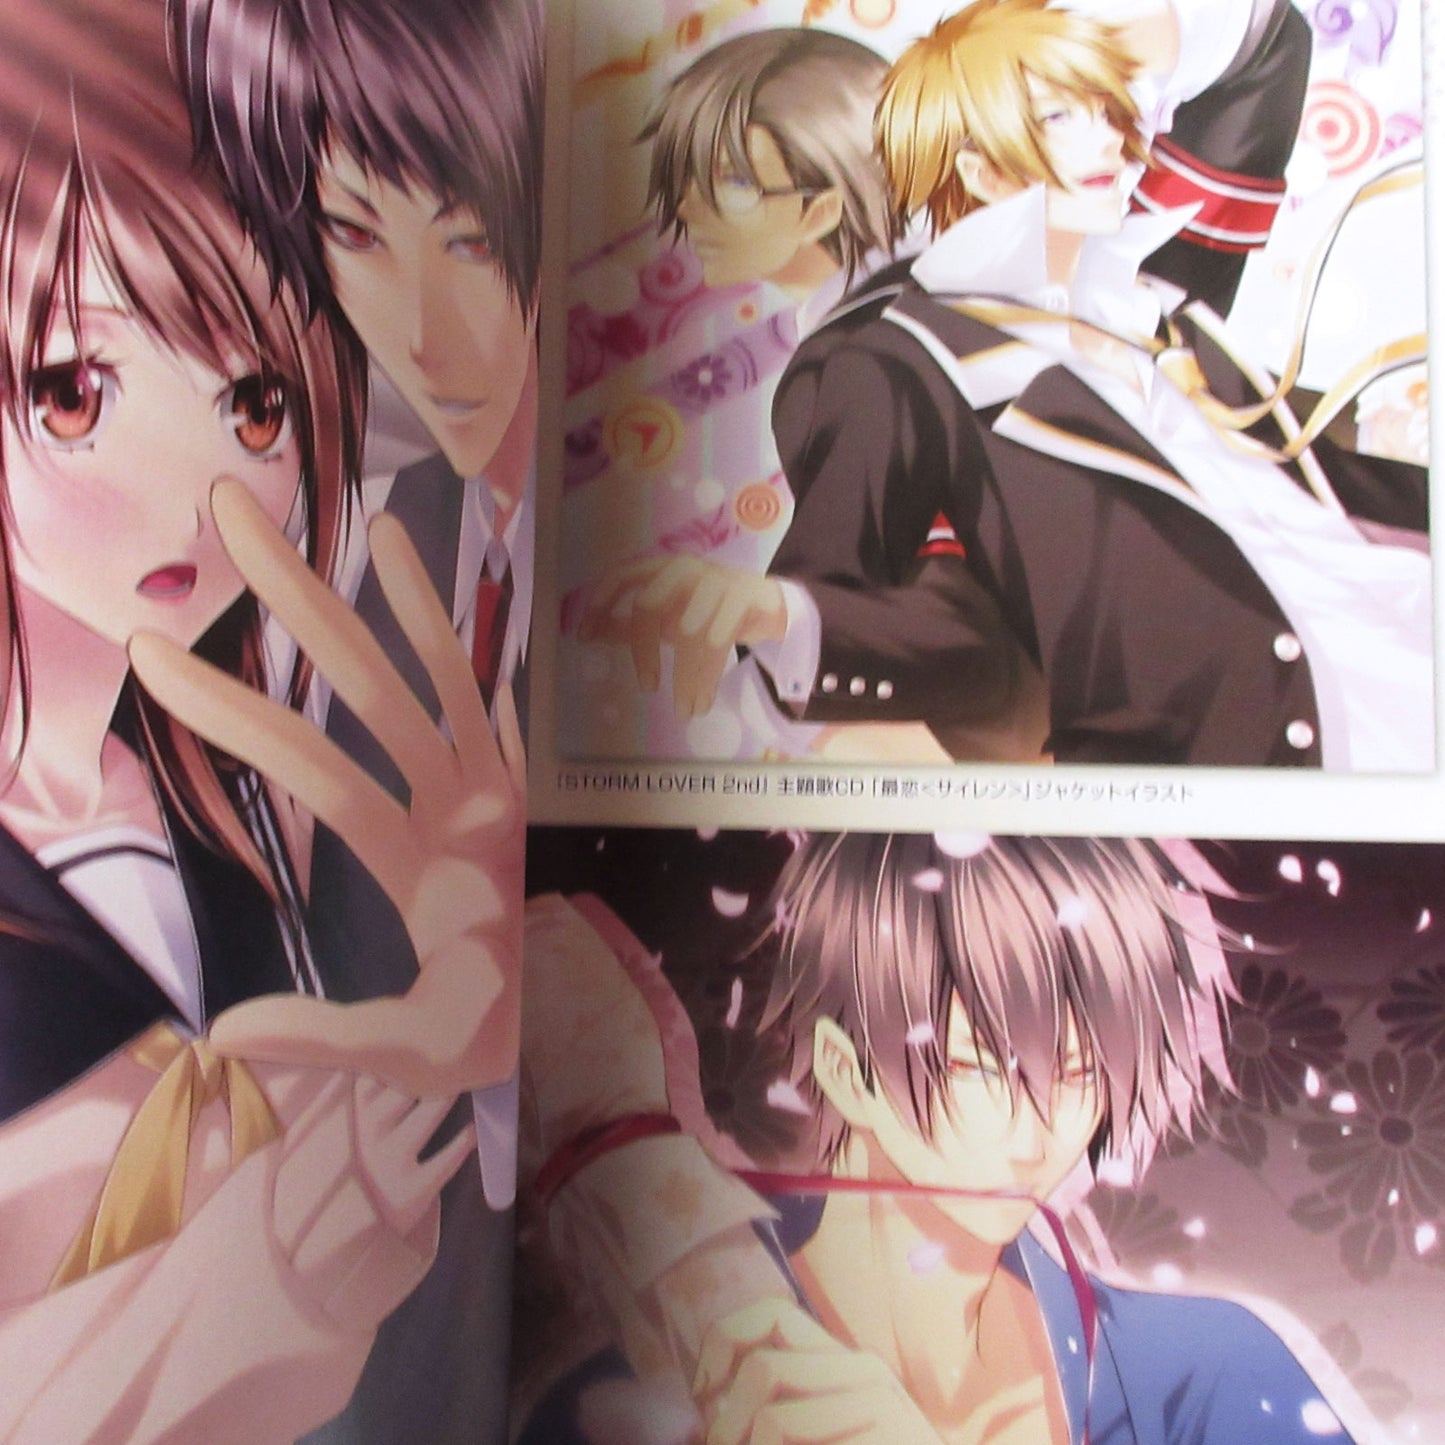 STORM LOVER 2nd Official Visual Fan Book